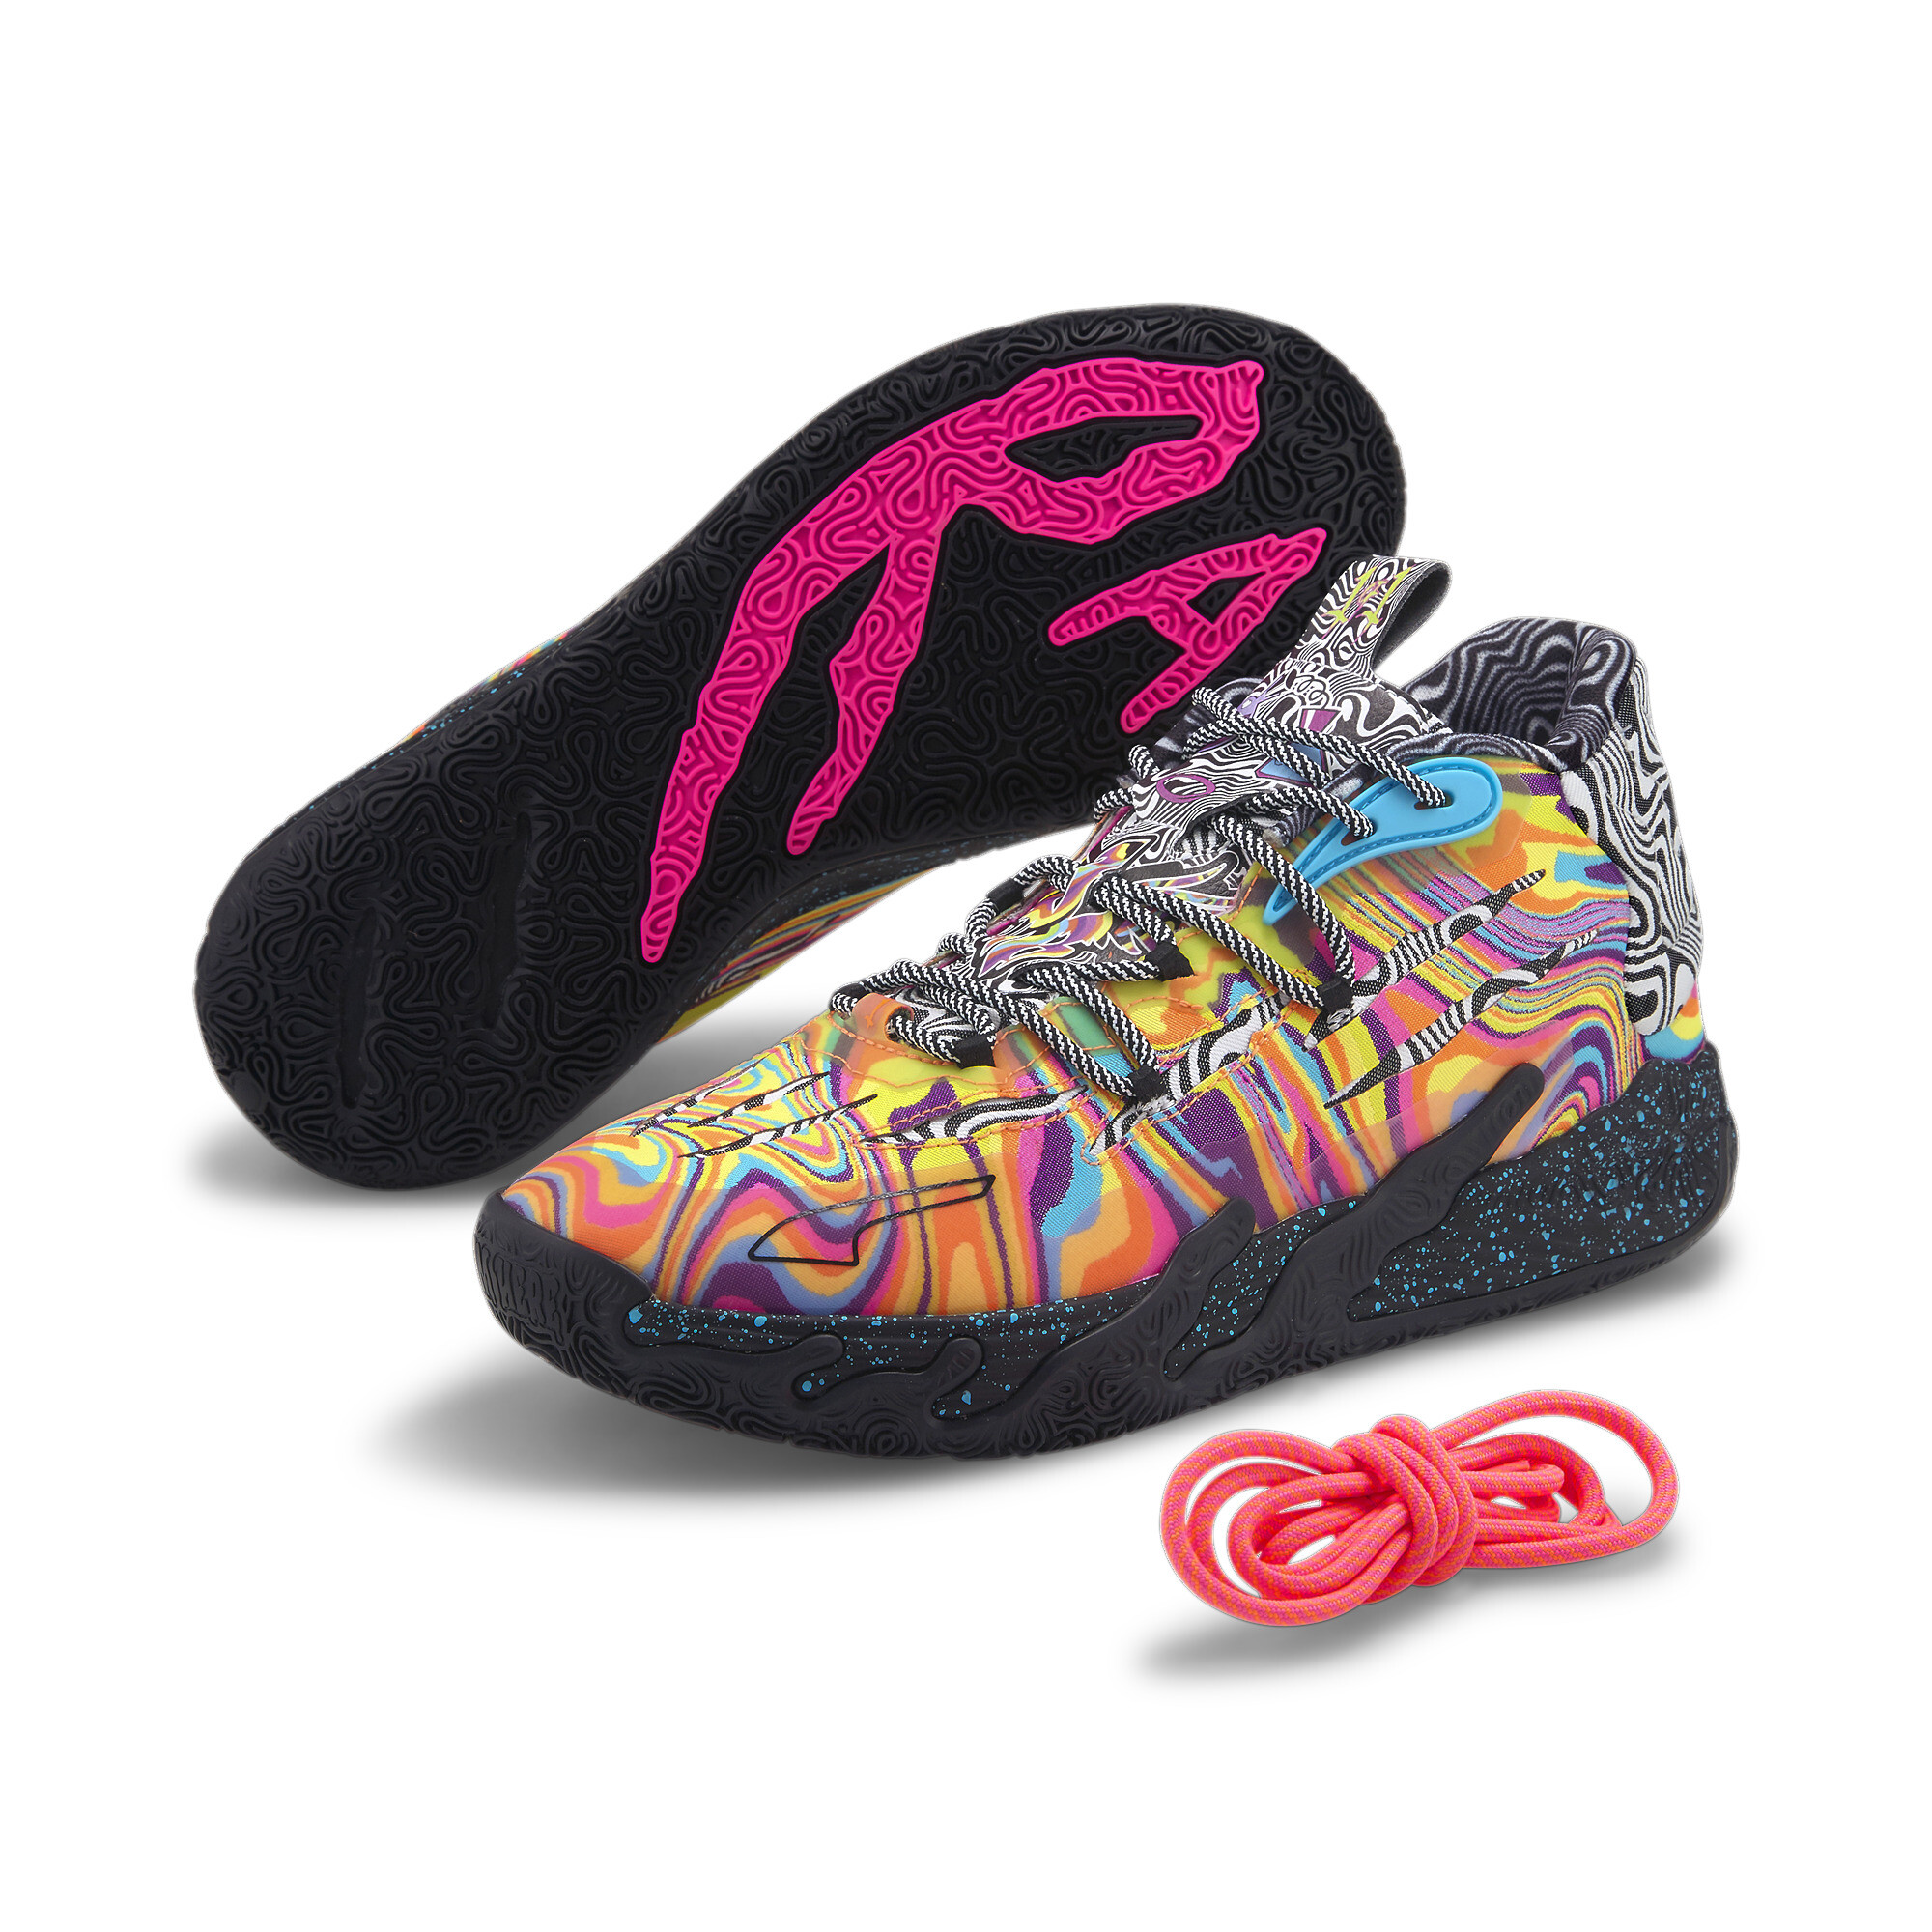 Puma MB.03 Dexter's Laboratory Basketball Shoes, Pink, Size 38, Shoes